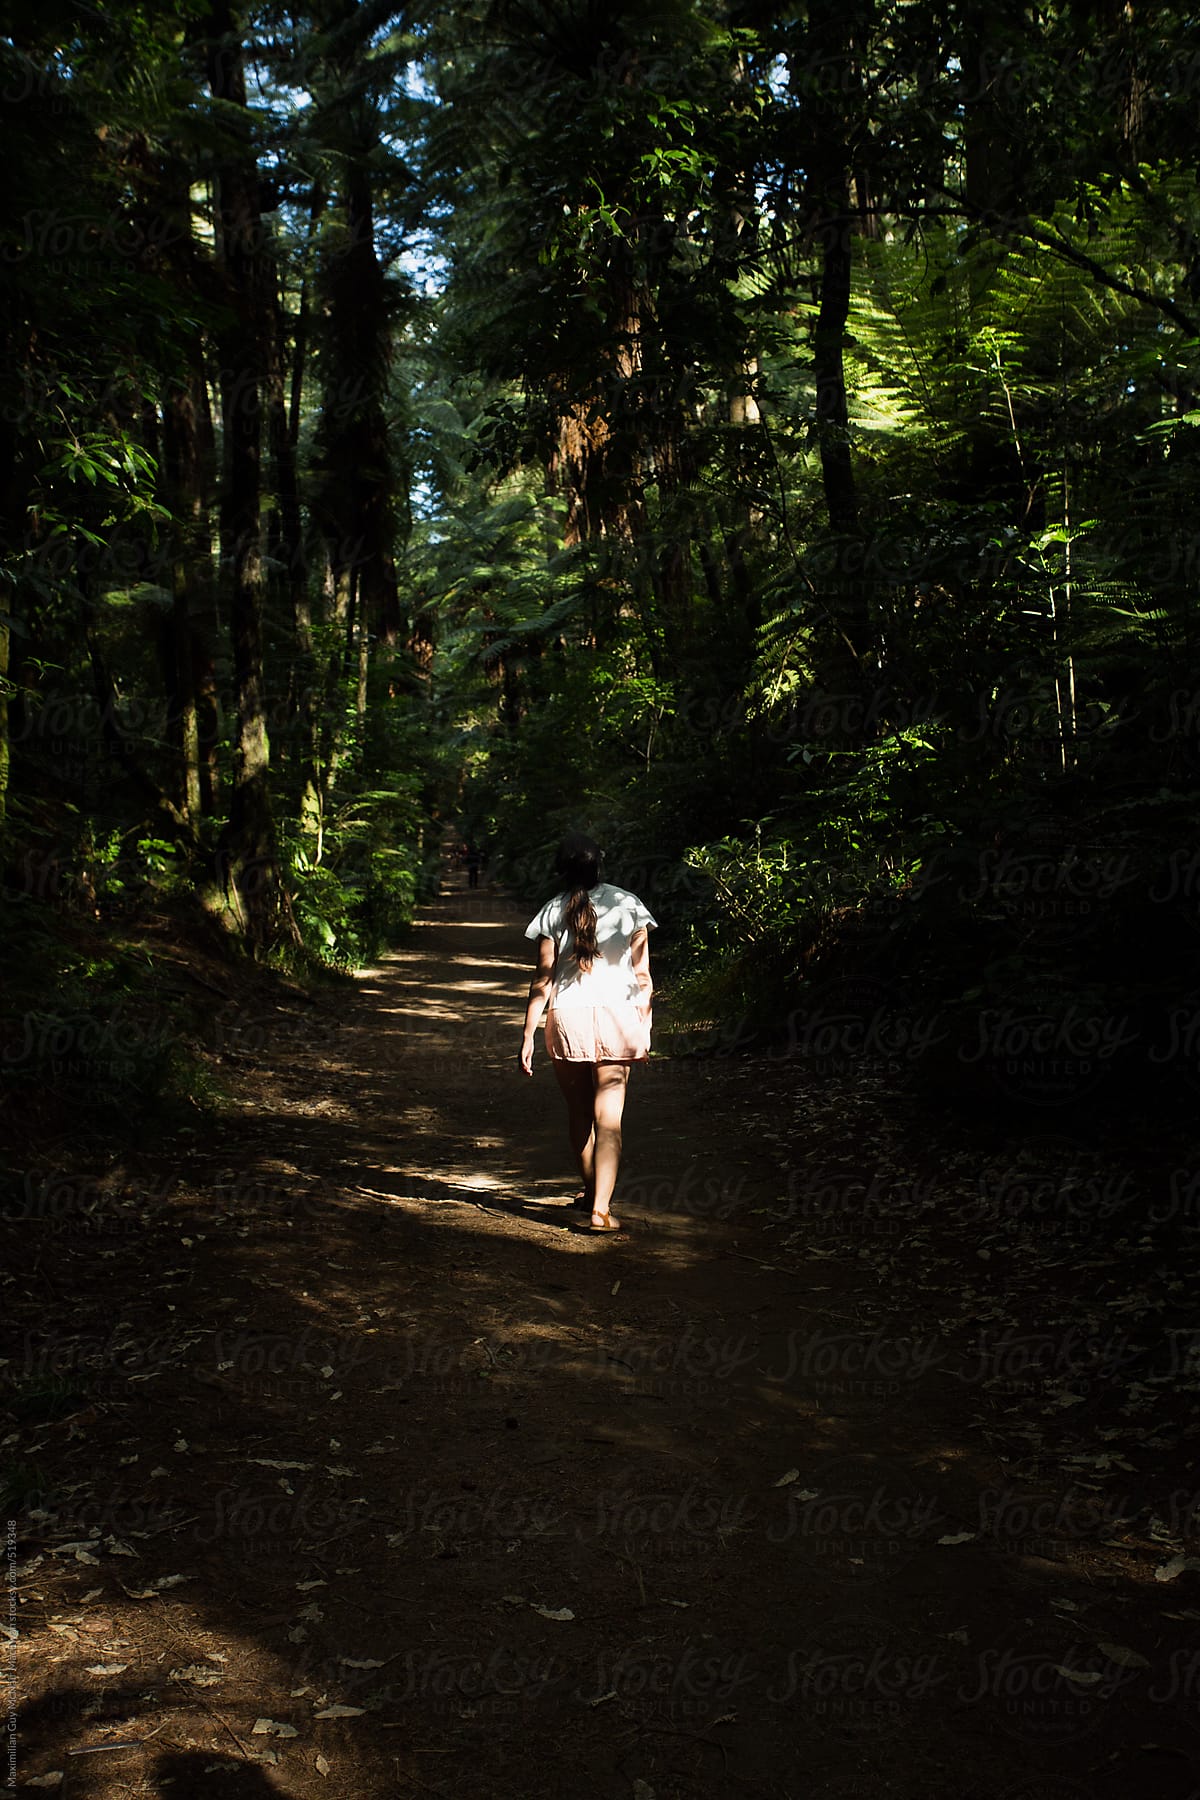 Strolling in the redwoods